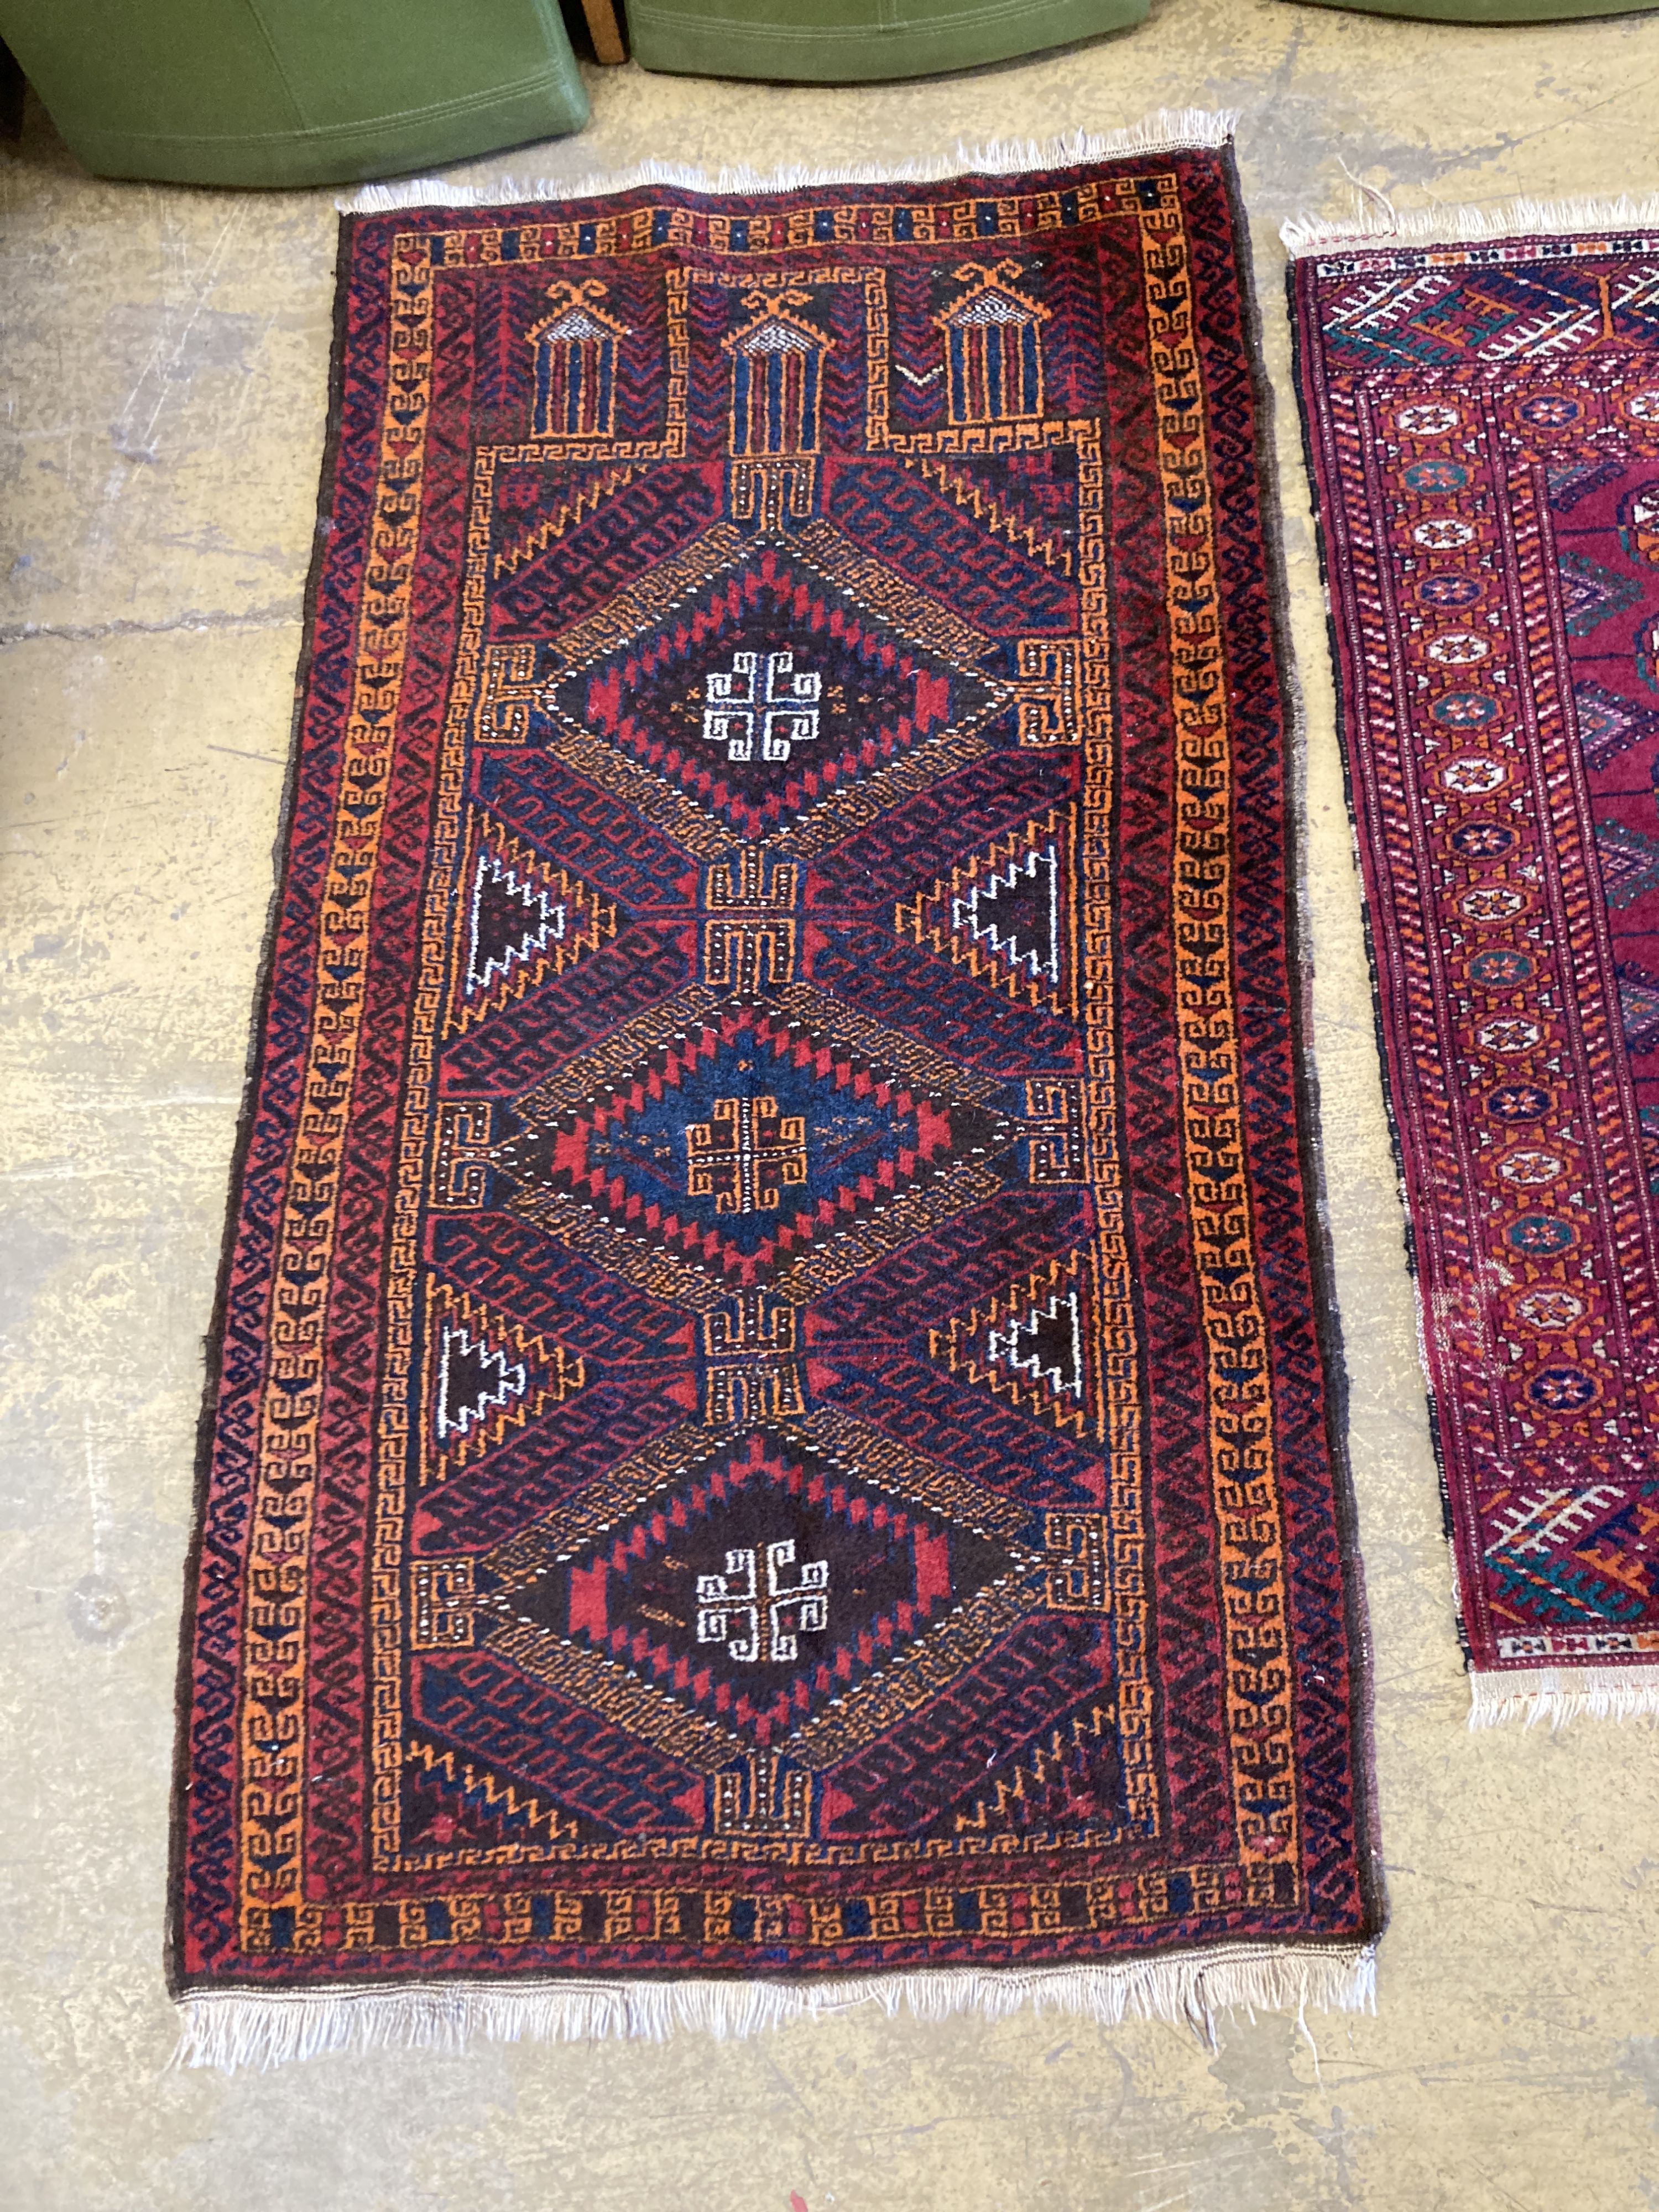 Two early 20th century flatweave rugs, a Bokhara rug and a Belouch rug, largest 220 x 160cm